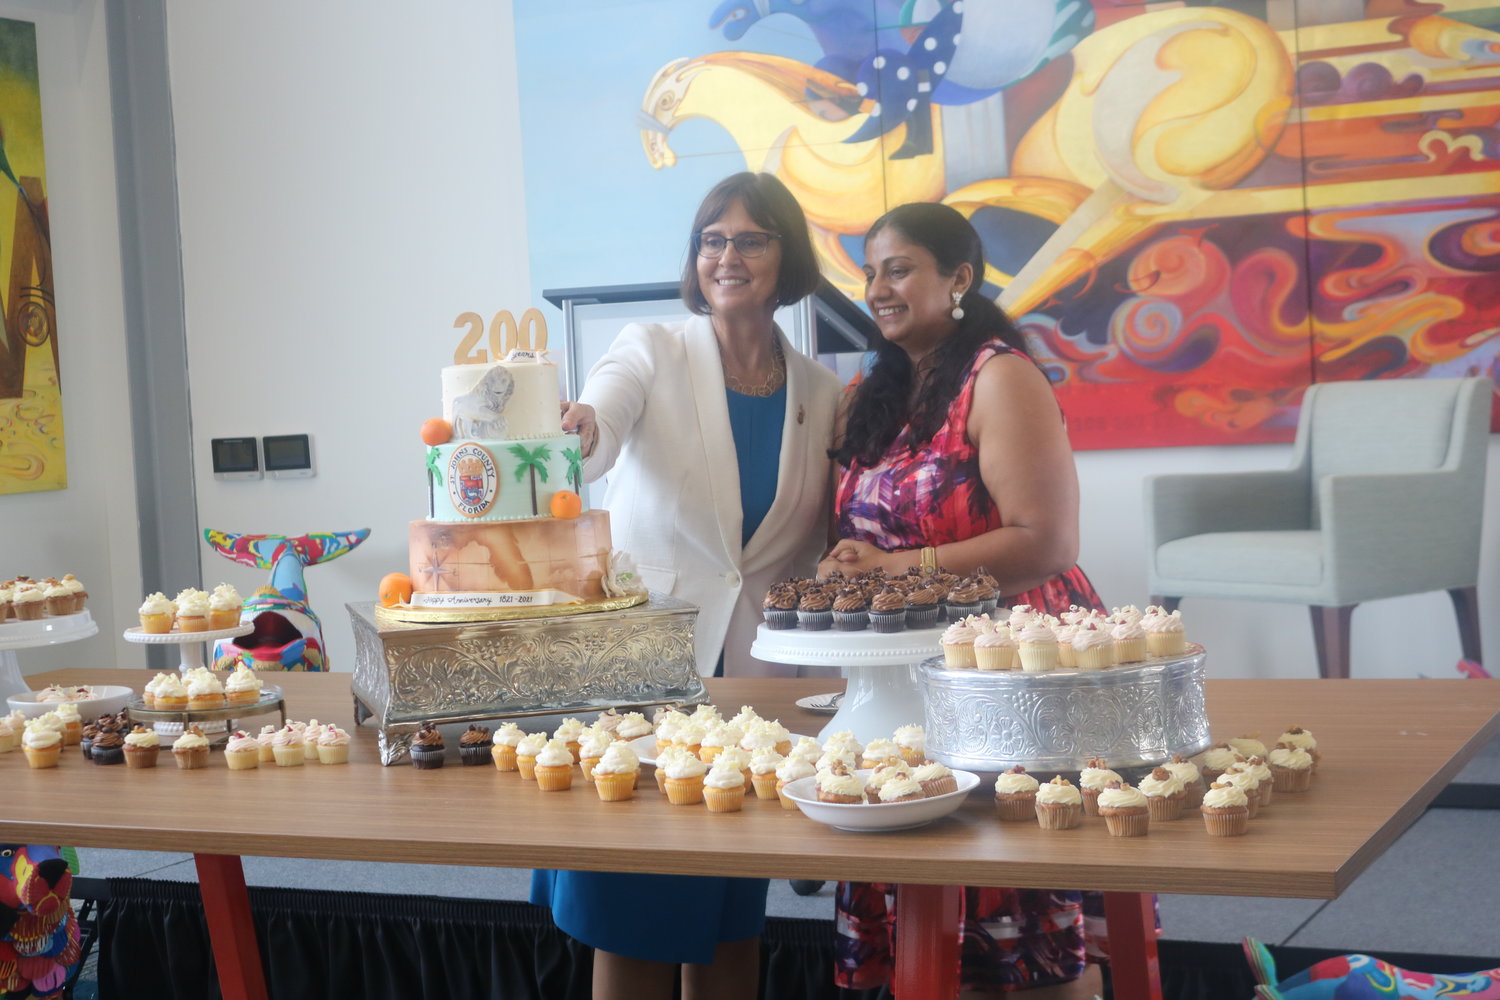 State Rep. Cyndi Stevenson, left, and Gurpreet Misra examine a cake celebrating the county’s bicentennial during grand opening festivities for the link on Wednesday, July 14.